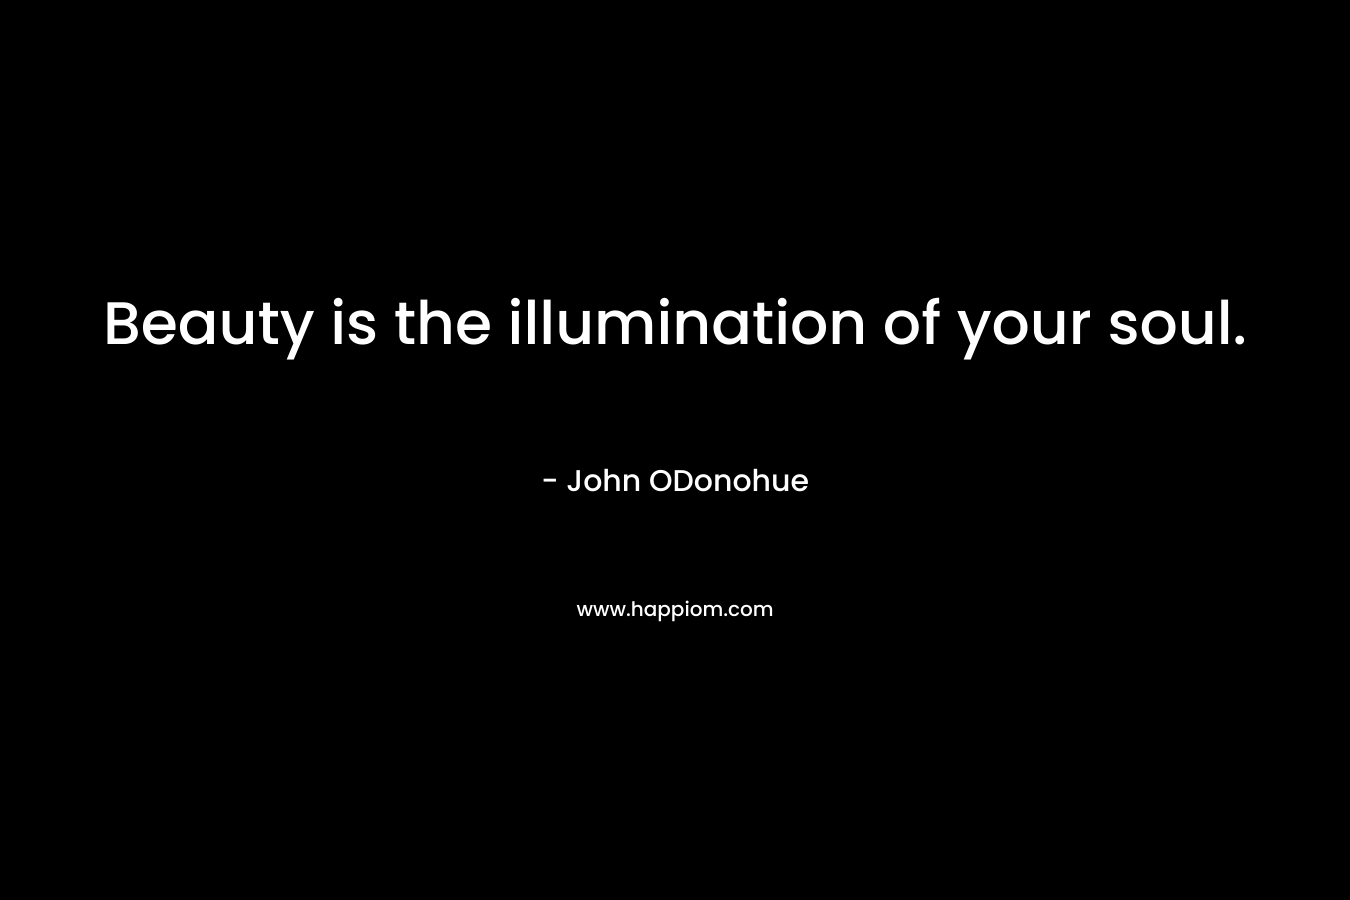 Beauty is the illumination of your soul.